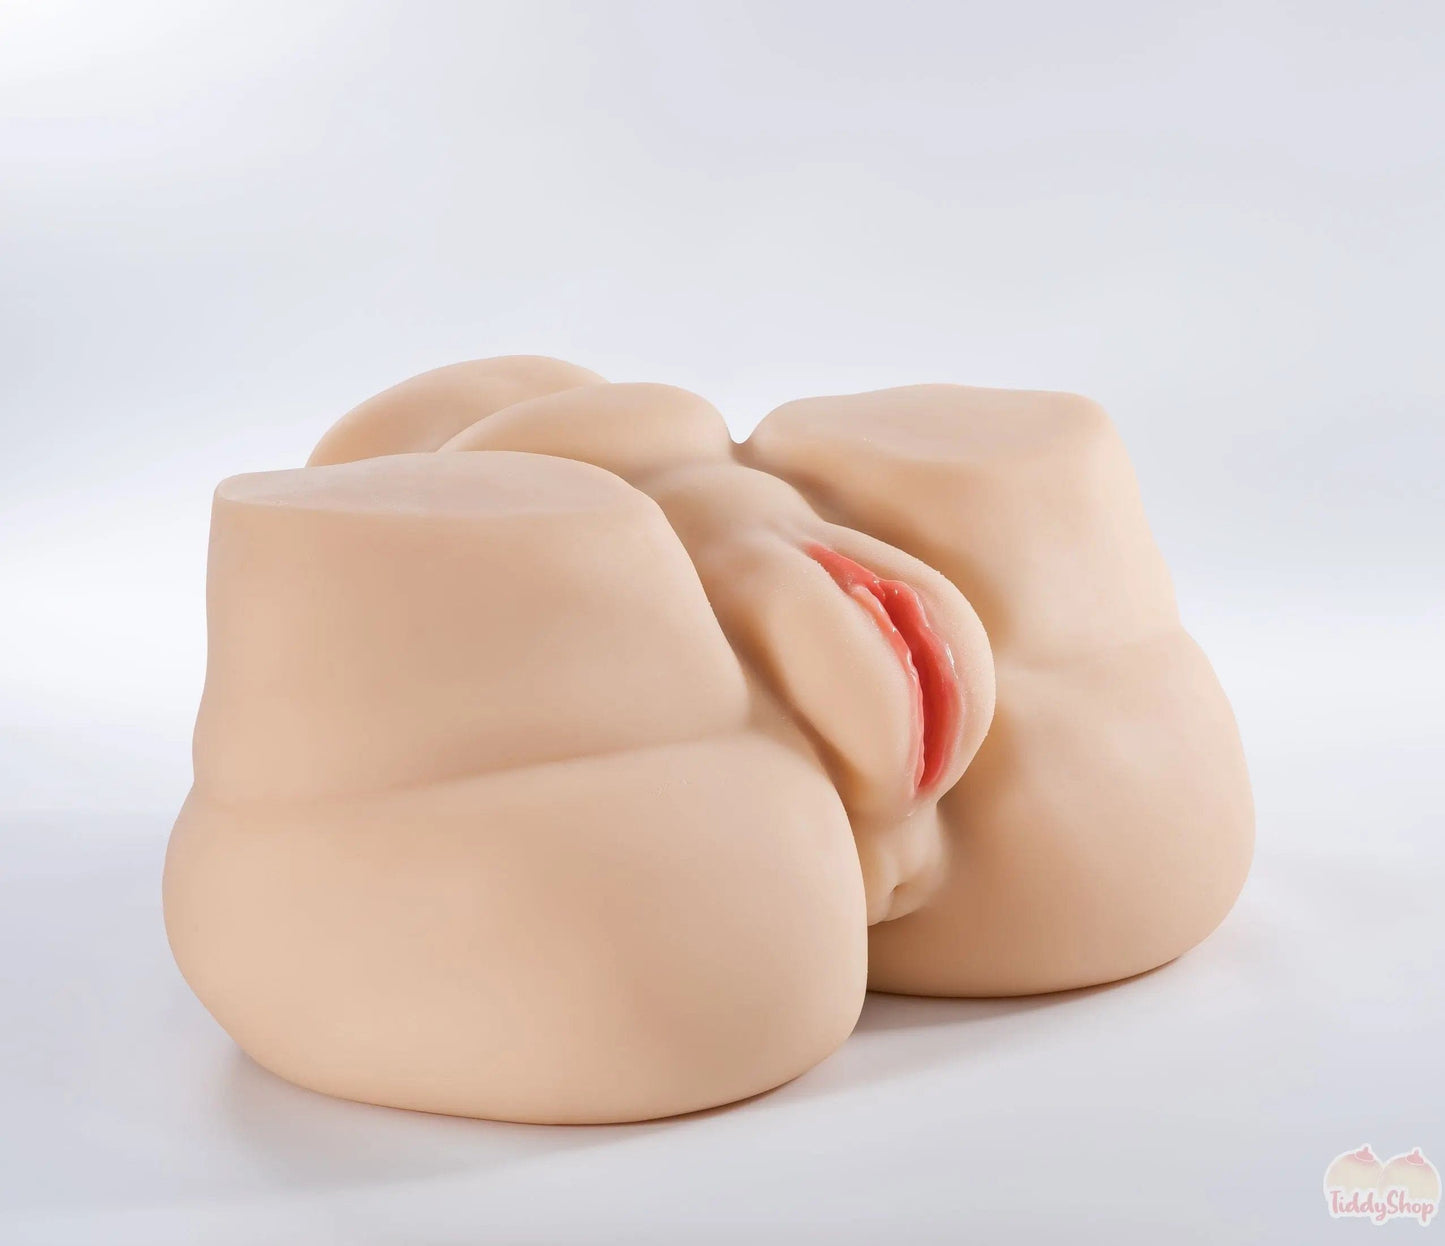 TiddyShop Heavenly Madame Squishable - JelloJiggles BBW Pear Gigantic Ass 94lb (43 kg)  - Extremely Jiggly Huge Booty Giant Butt Hip Toy Onahole - TiddyDollHouse TiddyShop